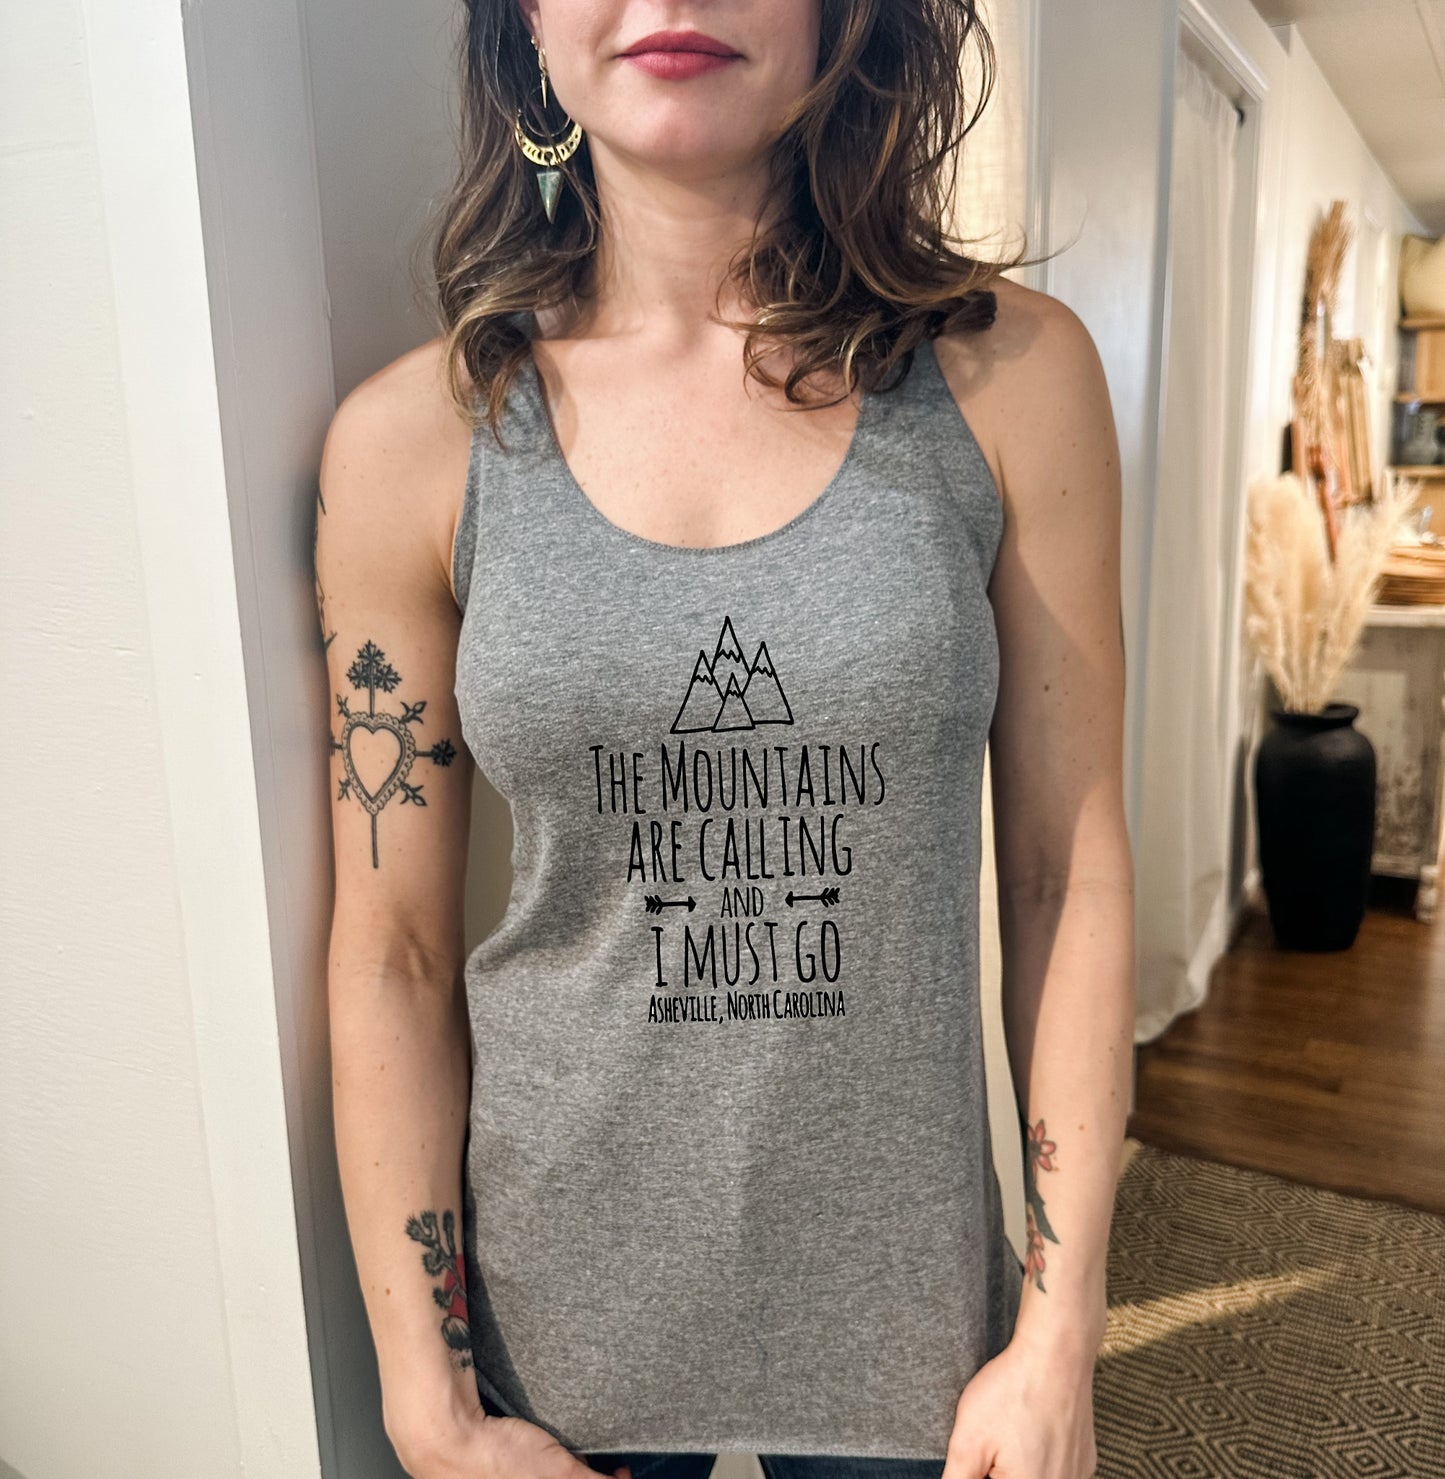 The Mountains Are Calling And I Must Go, Asheville North Carolina - Women's Tank - Heather Gray, Tahiti, or Envy